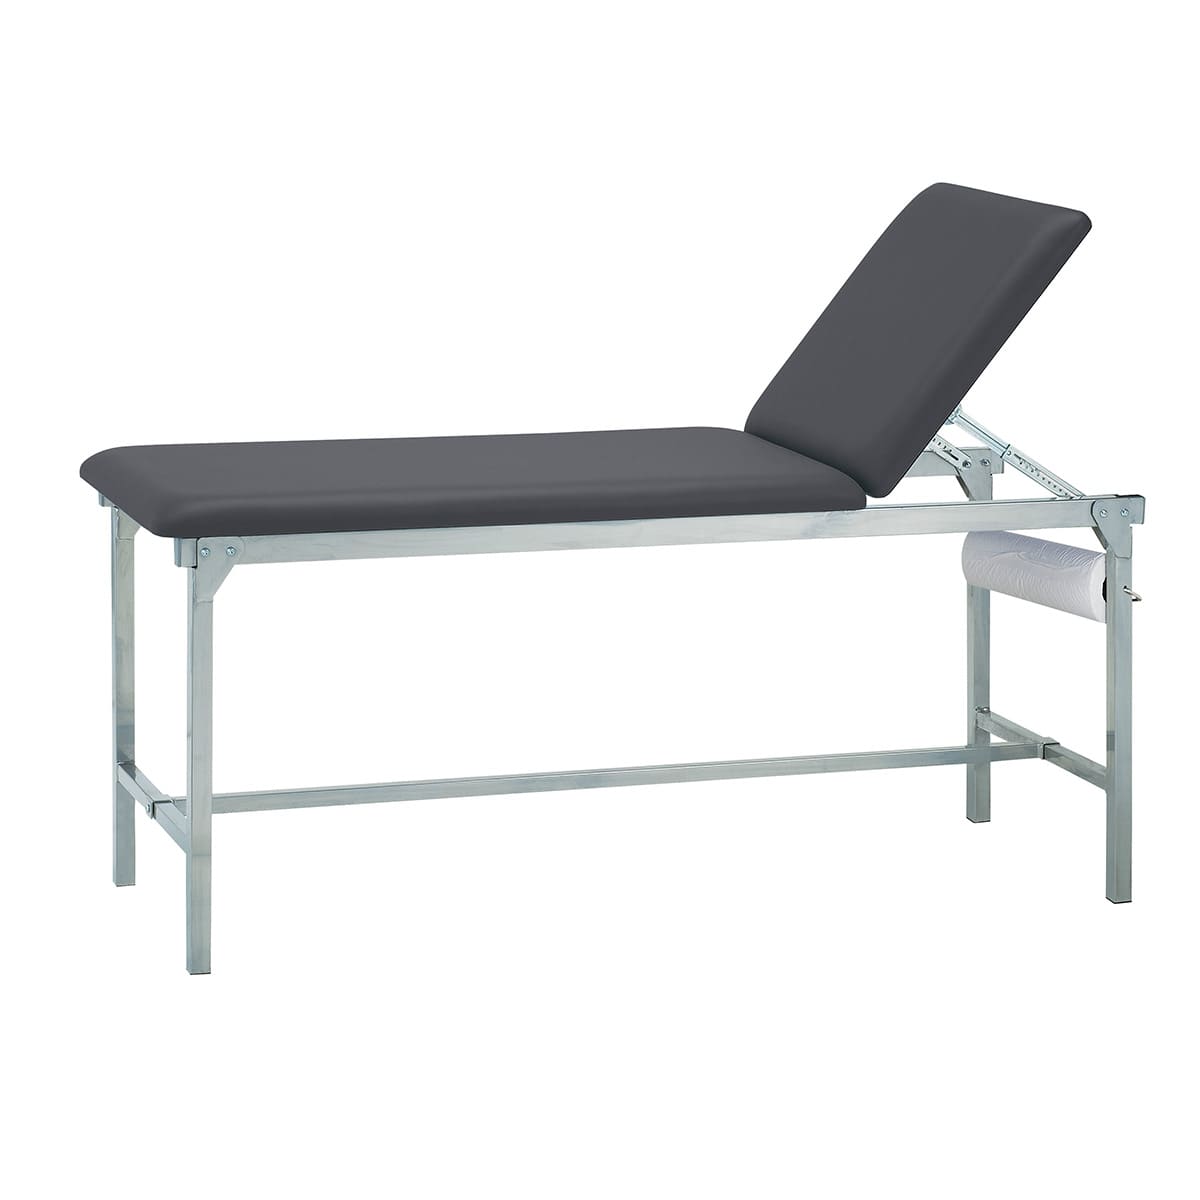 Examination couch width 60cm, height 80cm